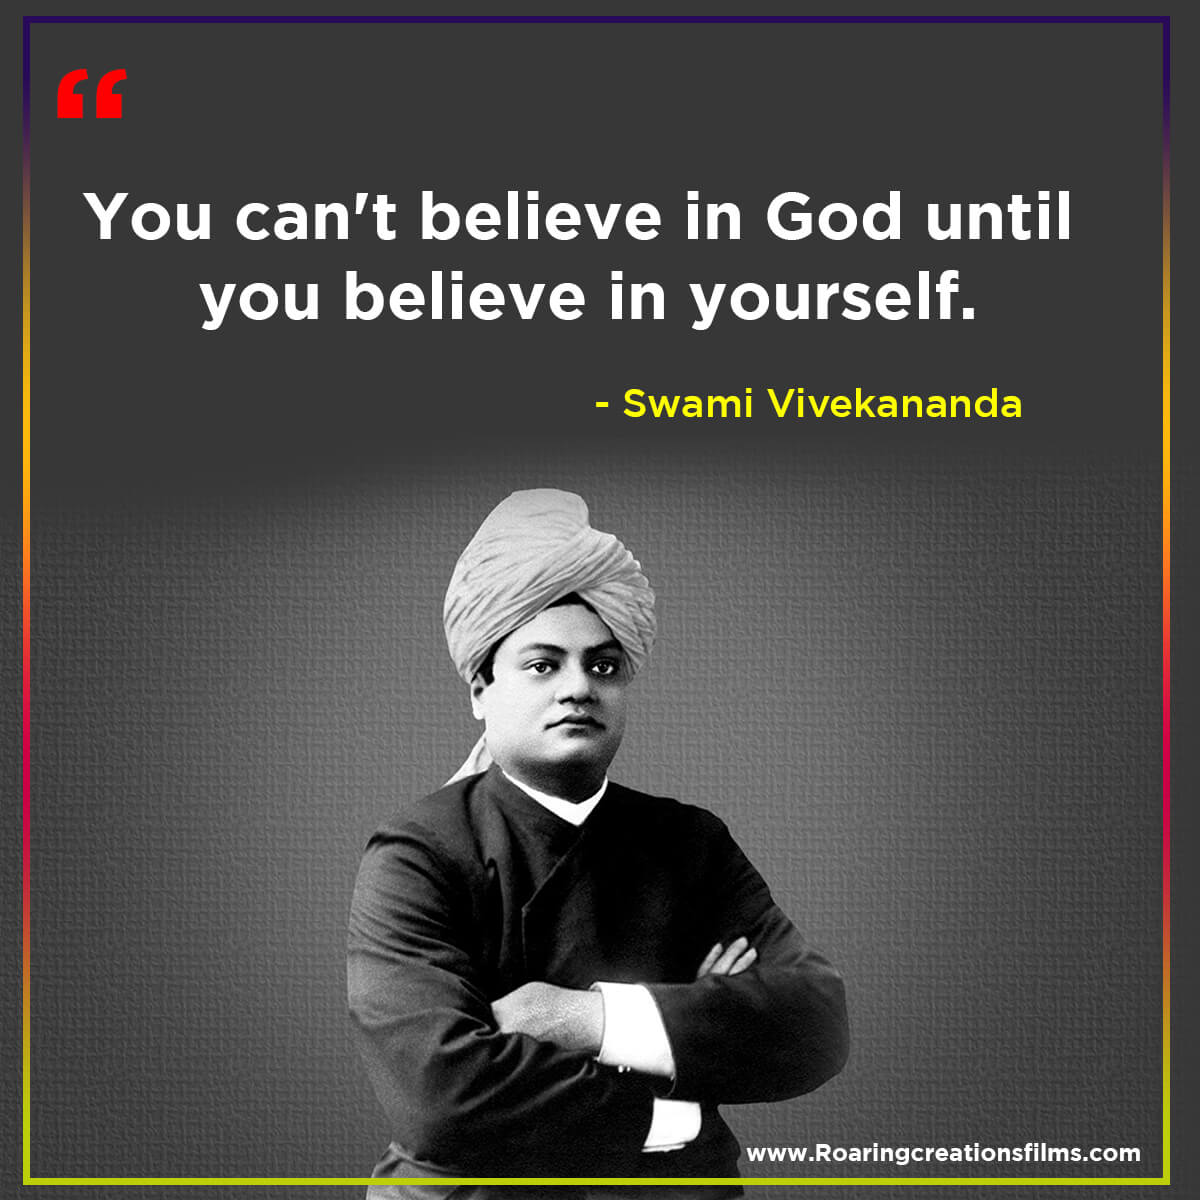 Astonishing Compilation of 1000+ Vivekananda Quotes in Full 4K Images